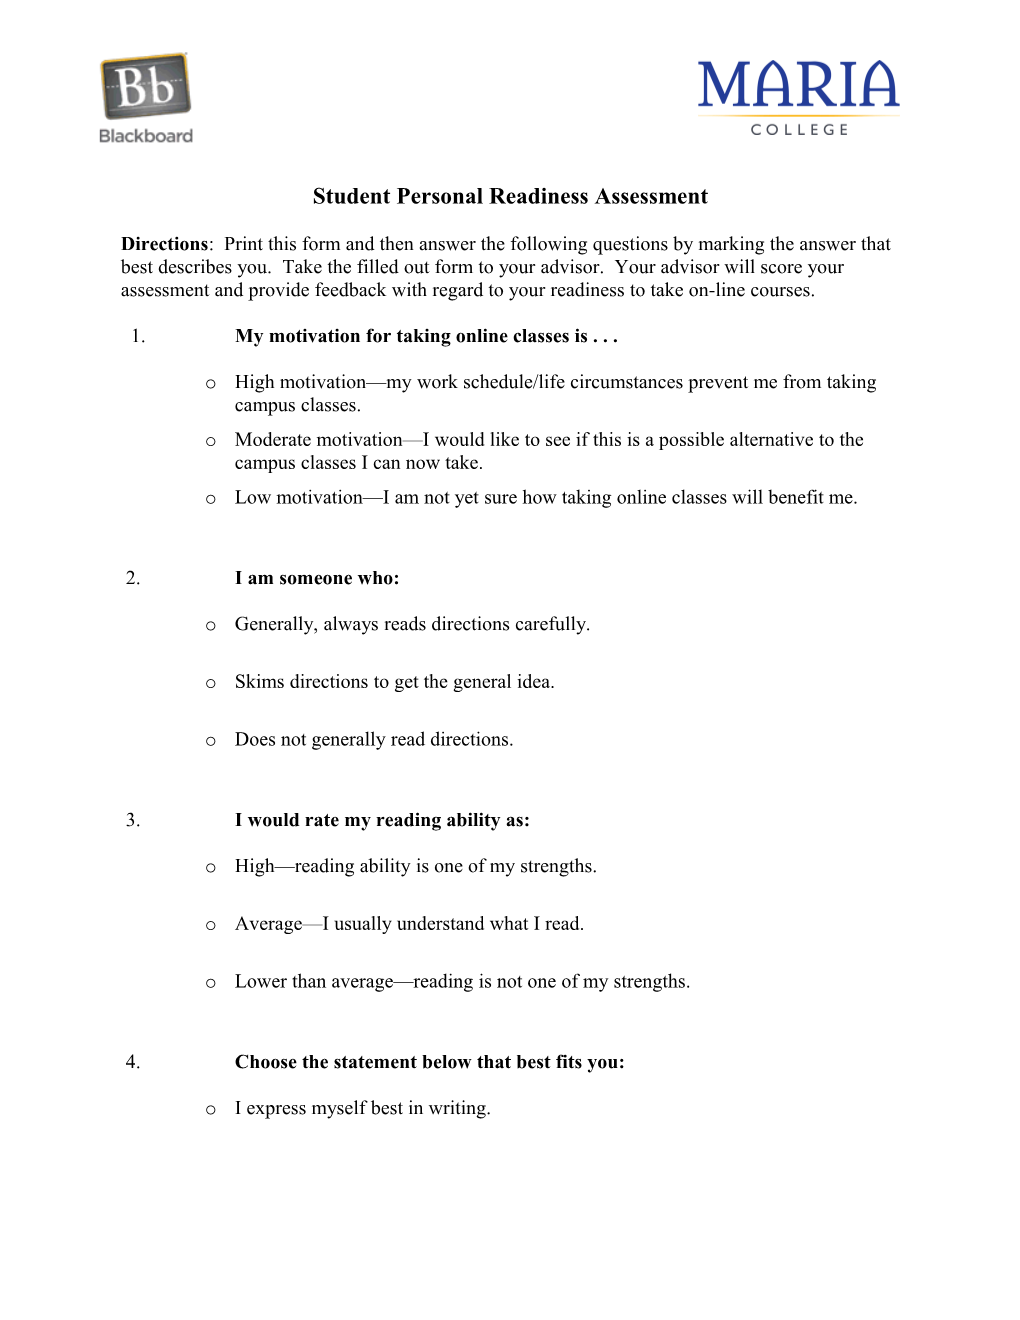 Student Personal Readiness Assessment